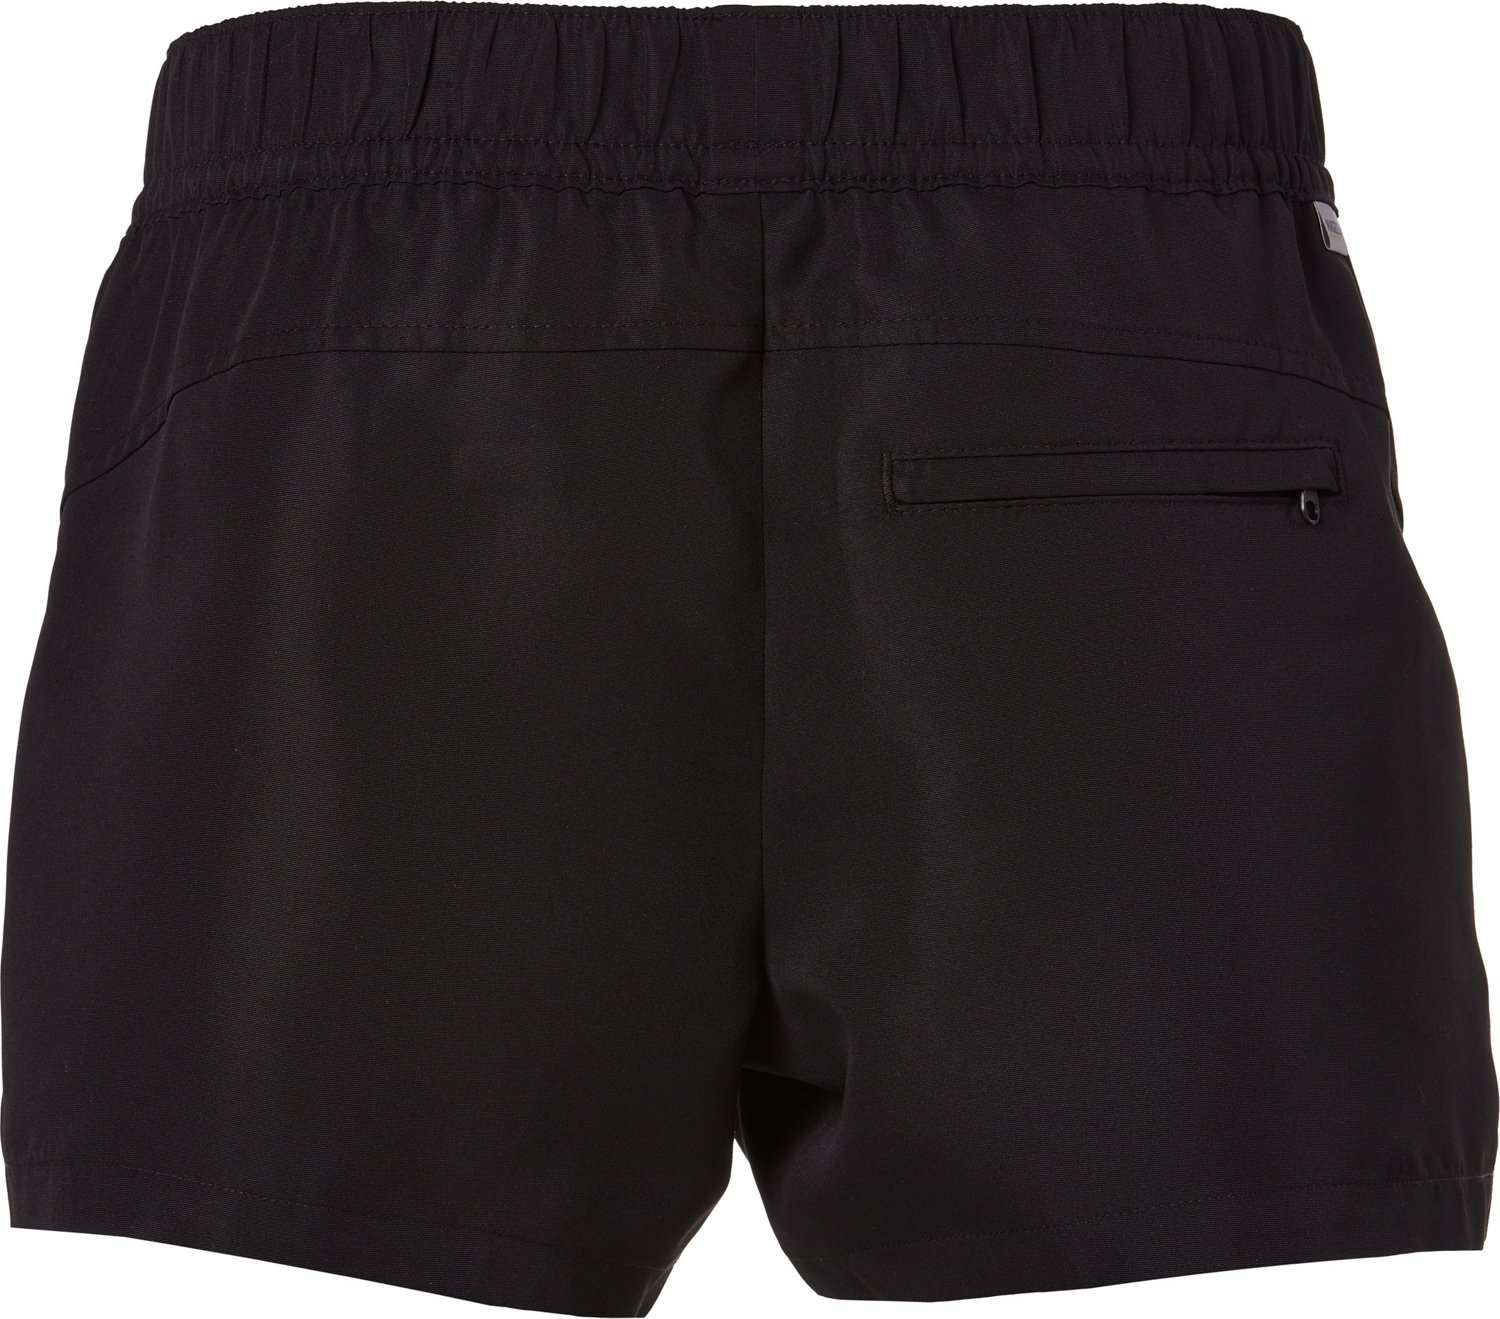 Magellan Women's Shorts Only $3.98 on Academy.com (Regularly $20) -  Includes Plus Size